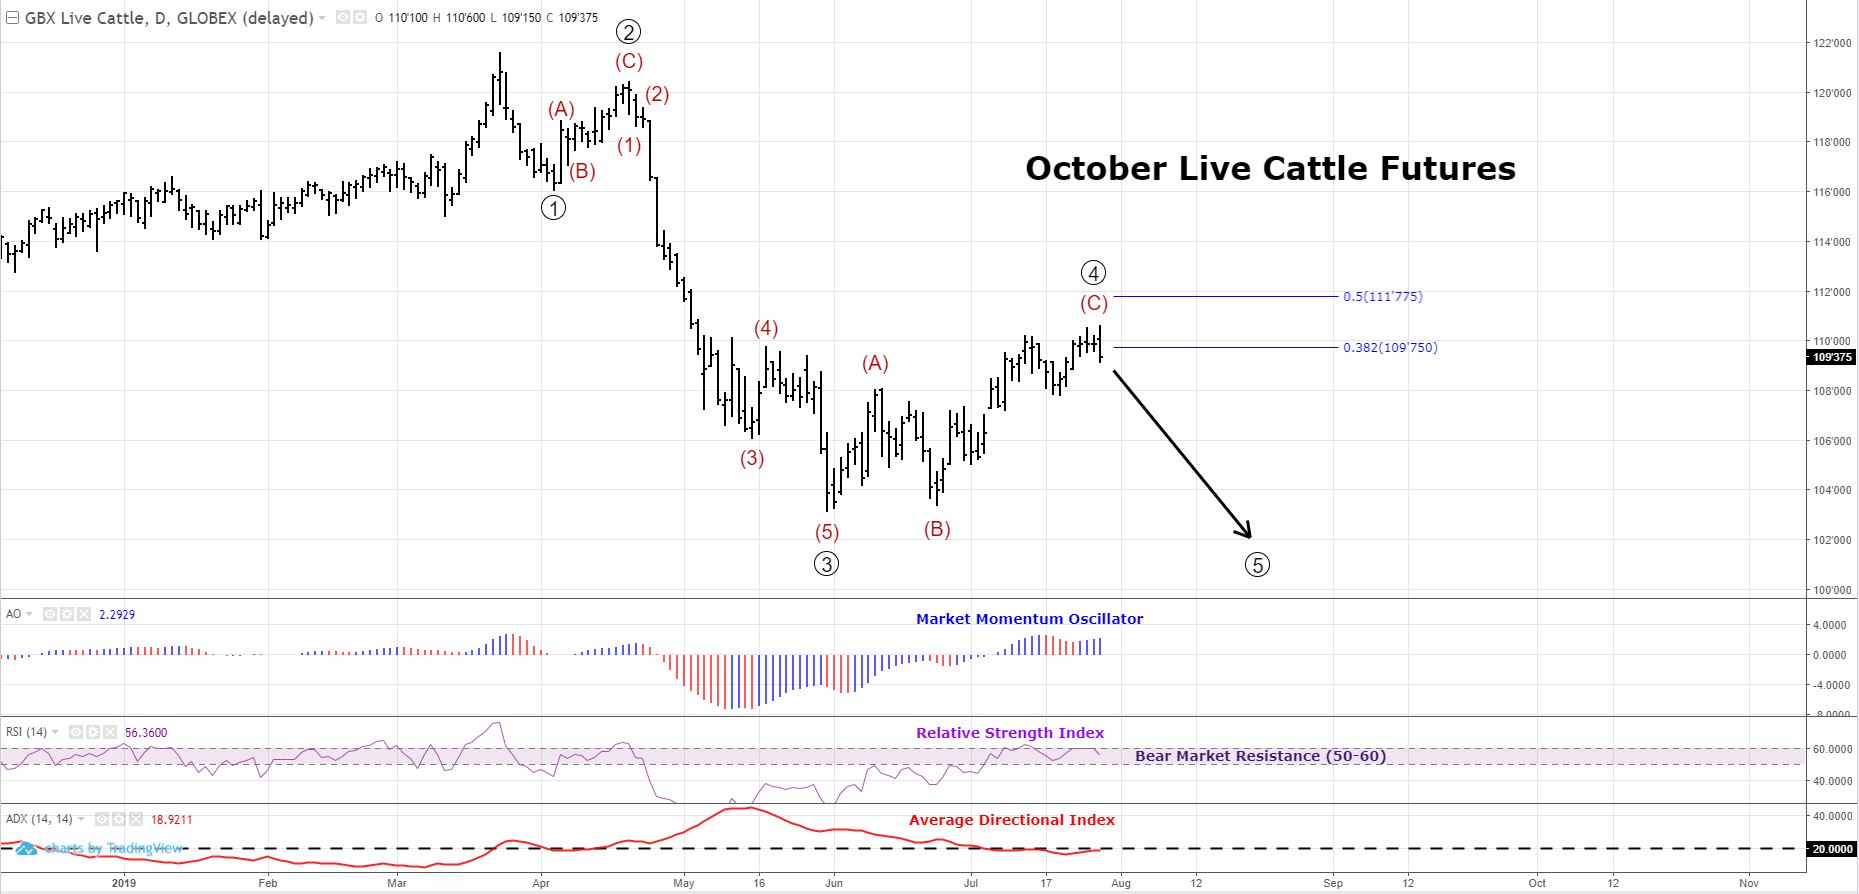 October Live Cattle Futures Technical Analysis